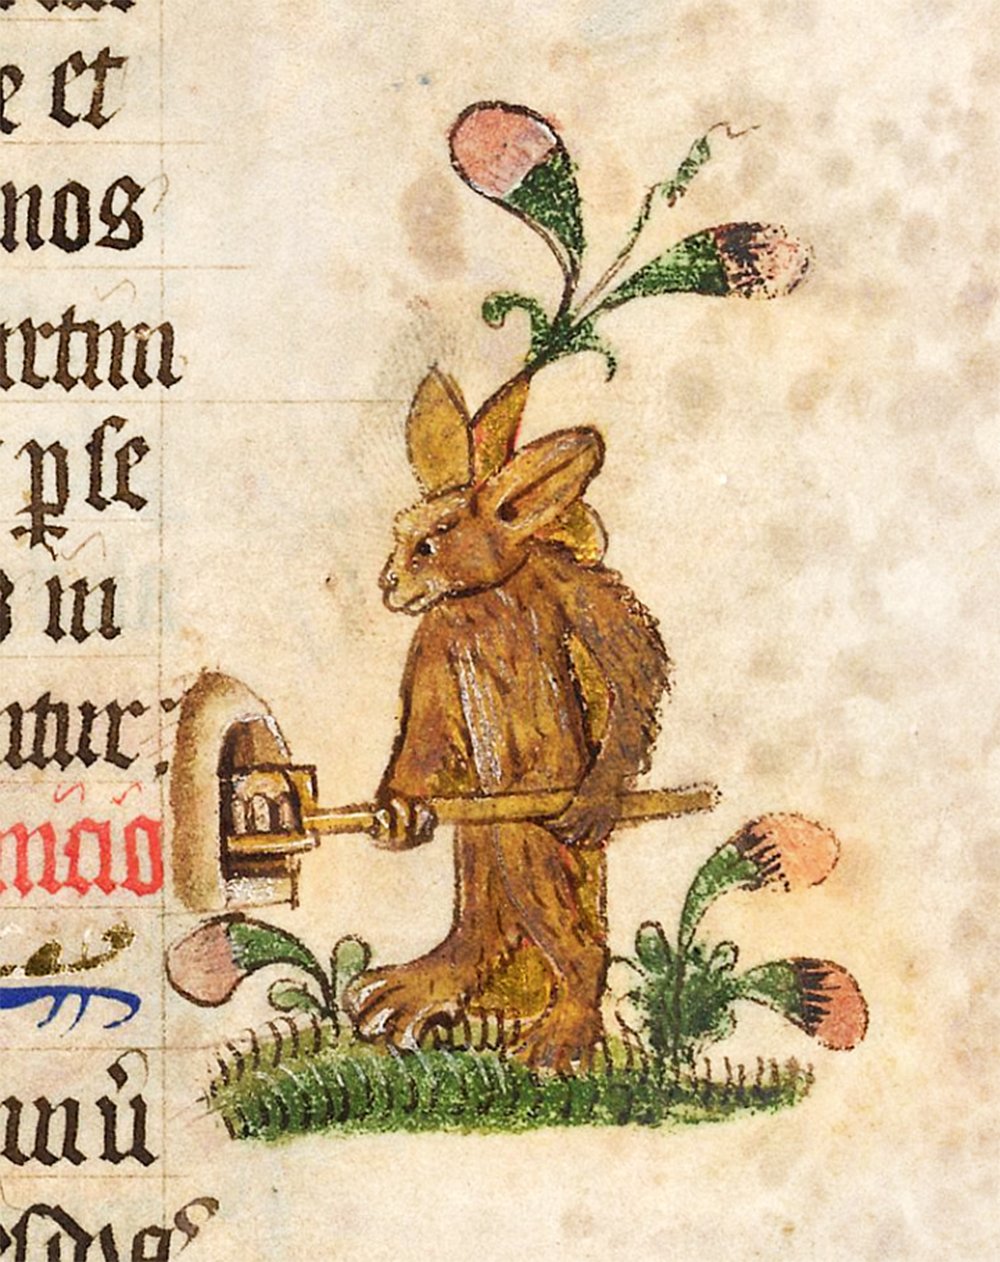 A medieval illustration of a brown rabbit with a shovel pushing a pie into the oven, standing on a grassy patch with flowers. The rabbit is on a page from a manuscript with Latin text in Gothic script.